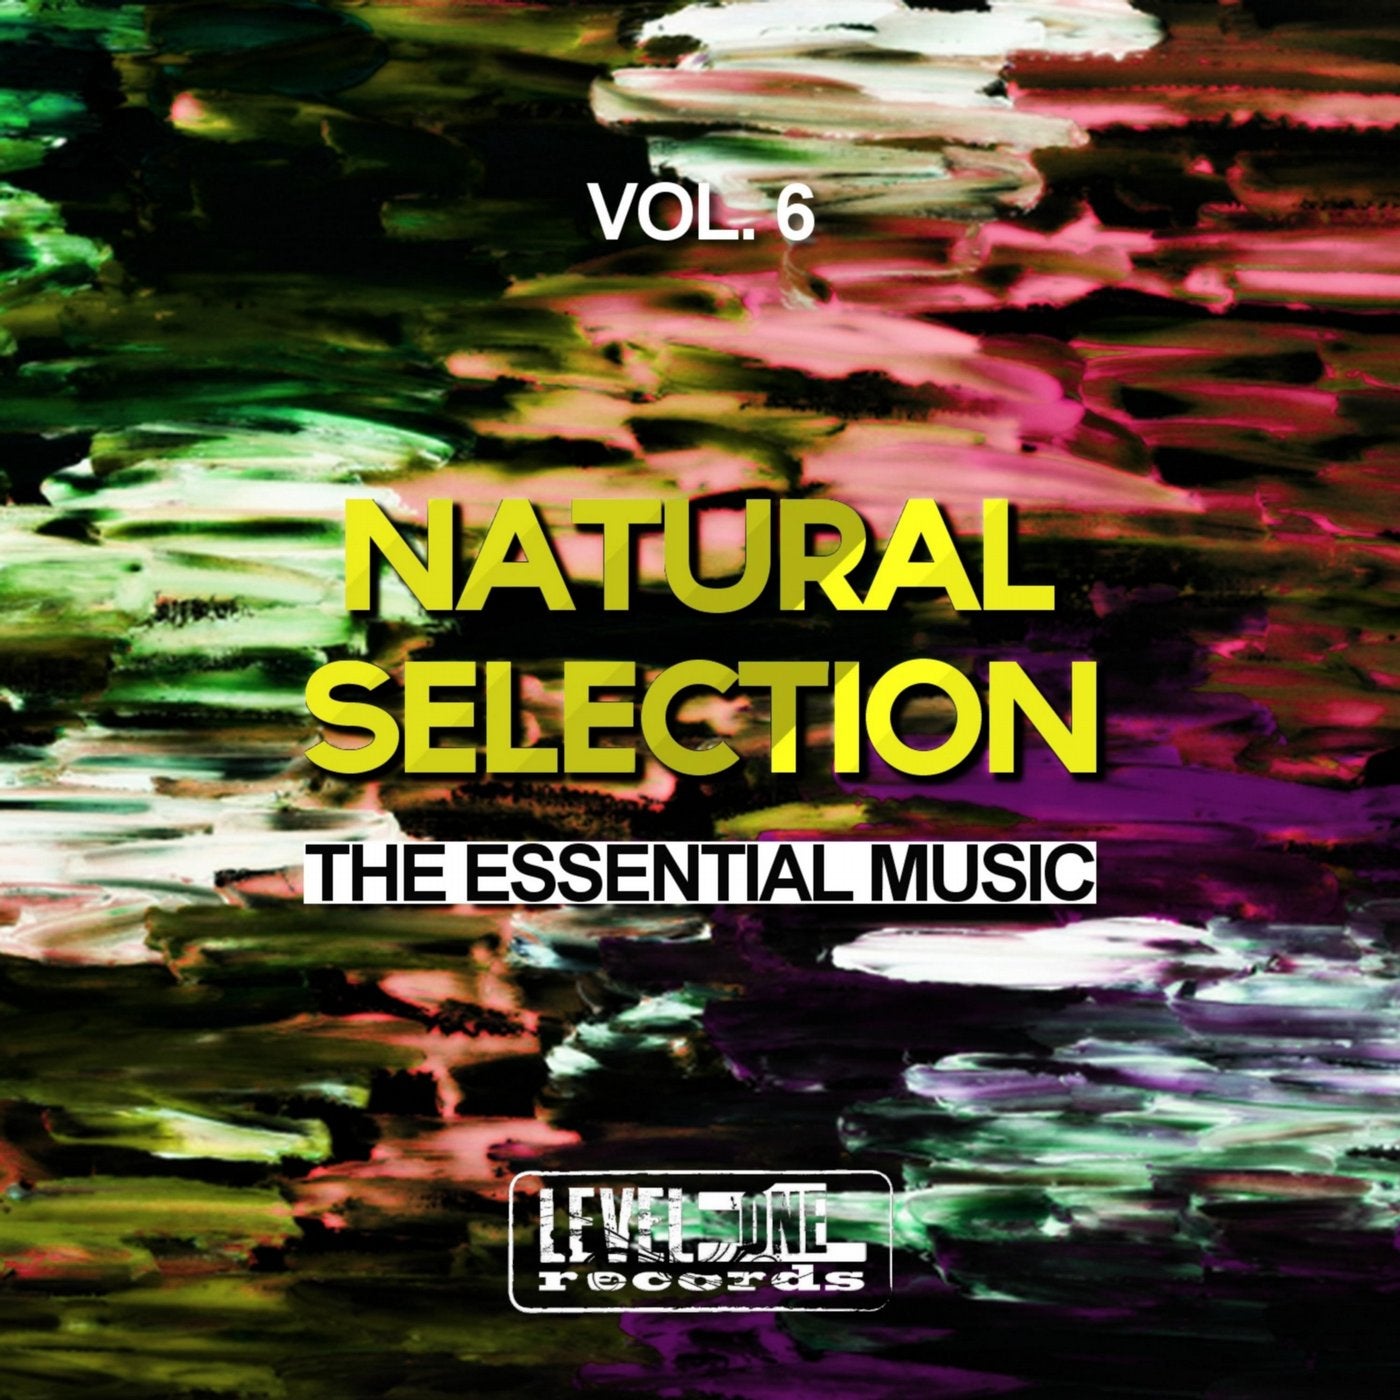 Natural Selection, Vol. 6 (The Essential Music)